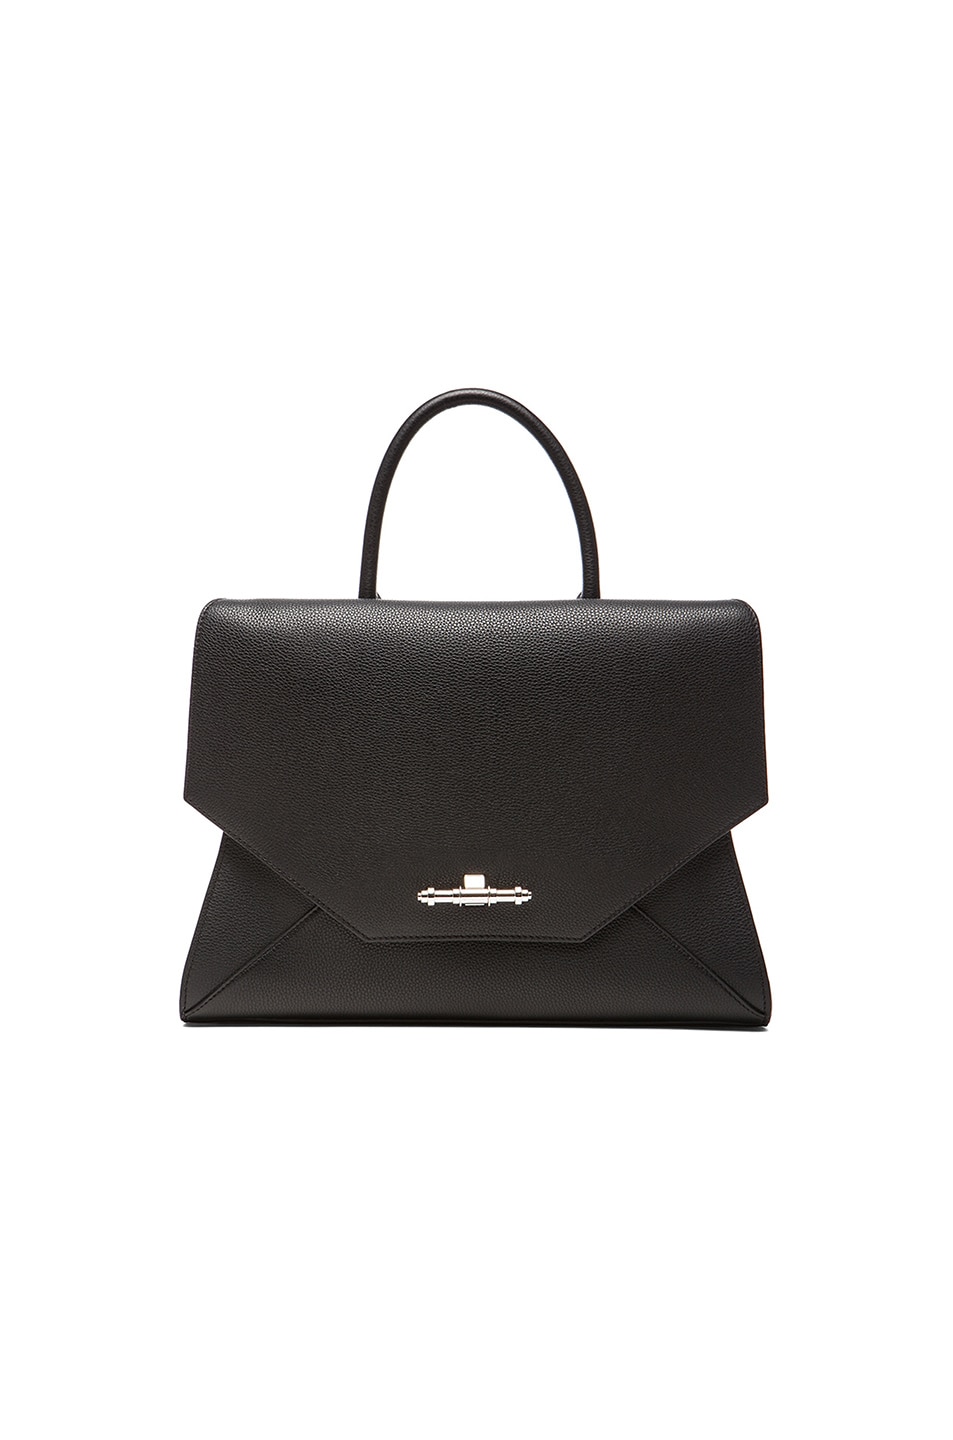 Image 1 of Givenchy Obsedia Leather Handbag in Black